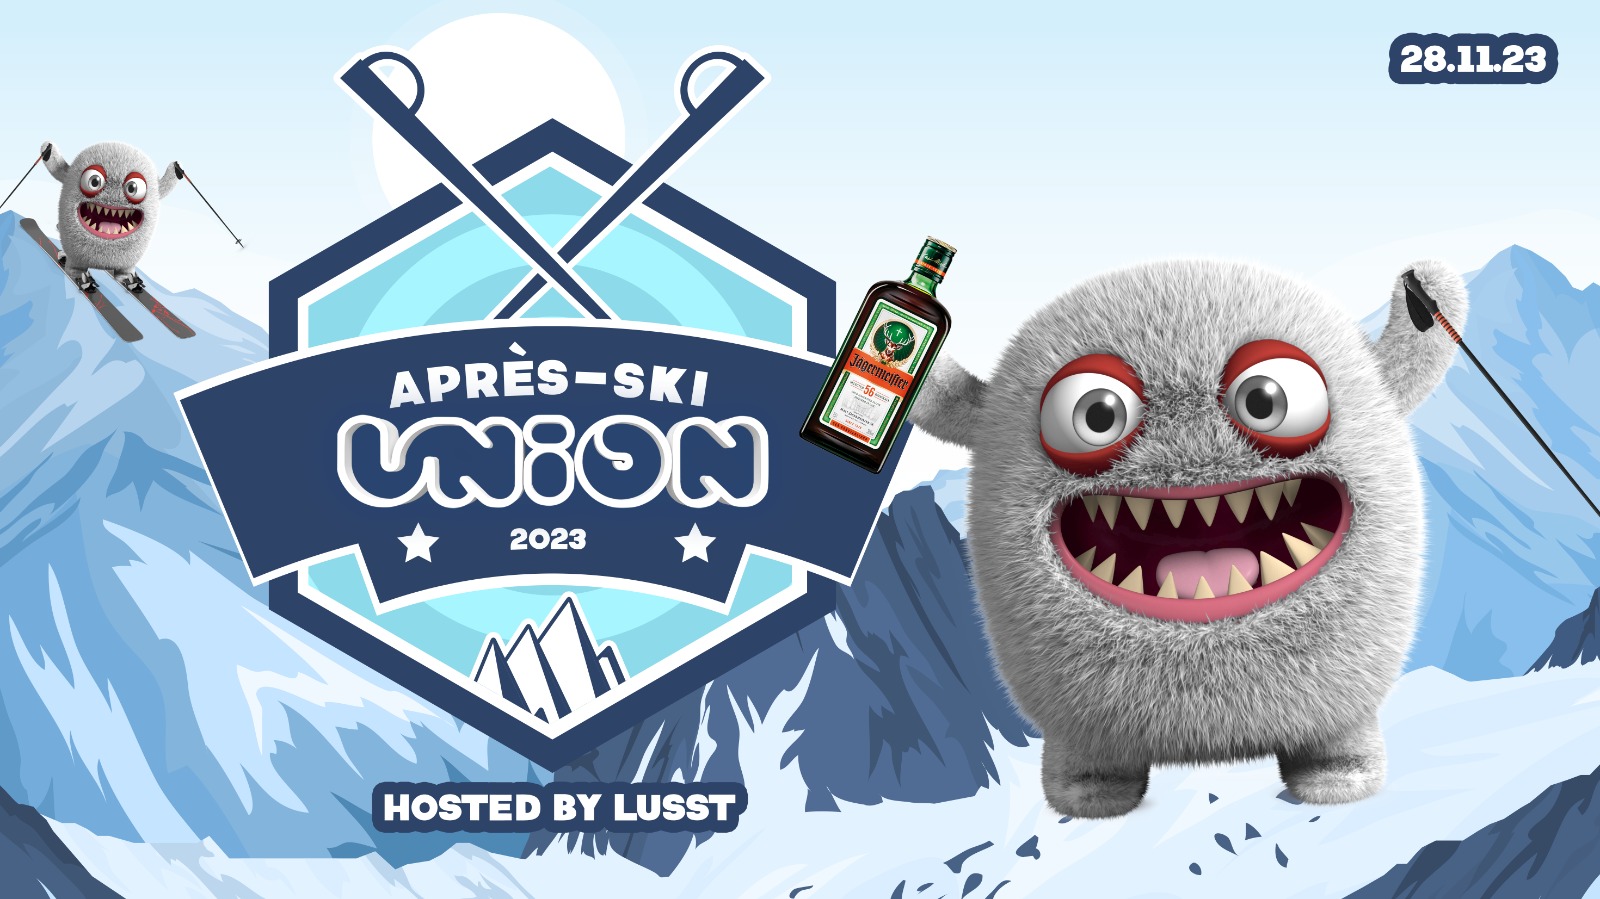 UNION TUESDAY’S // APRES SKI PARTY – Hosted by LUSST